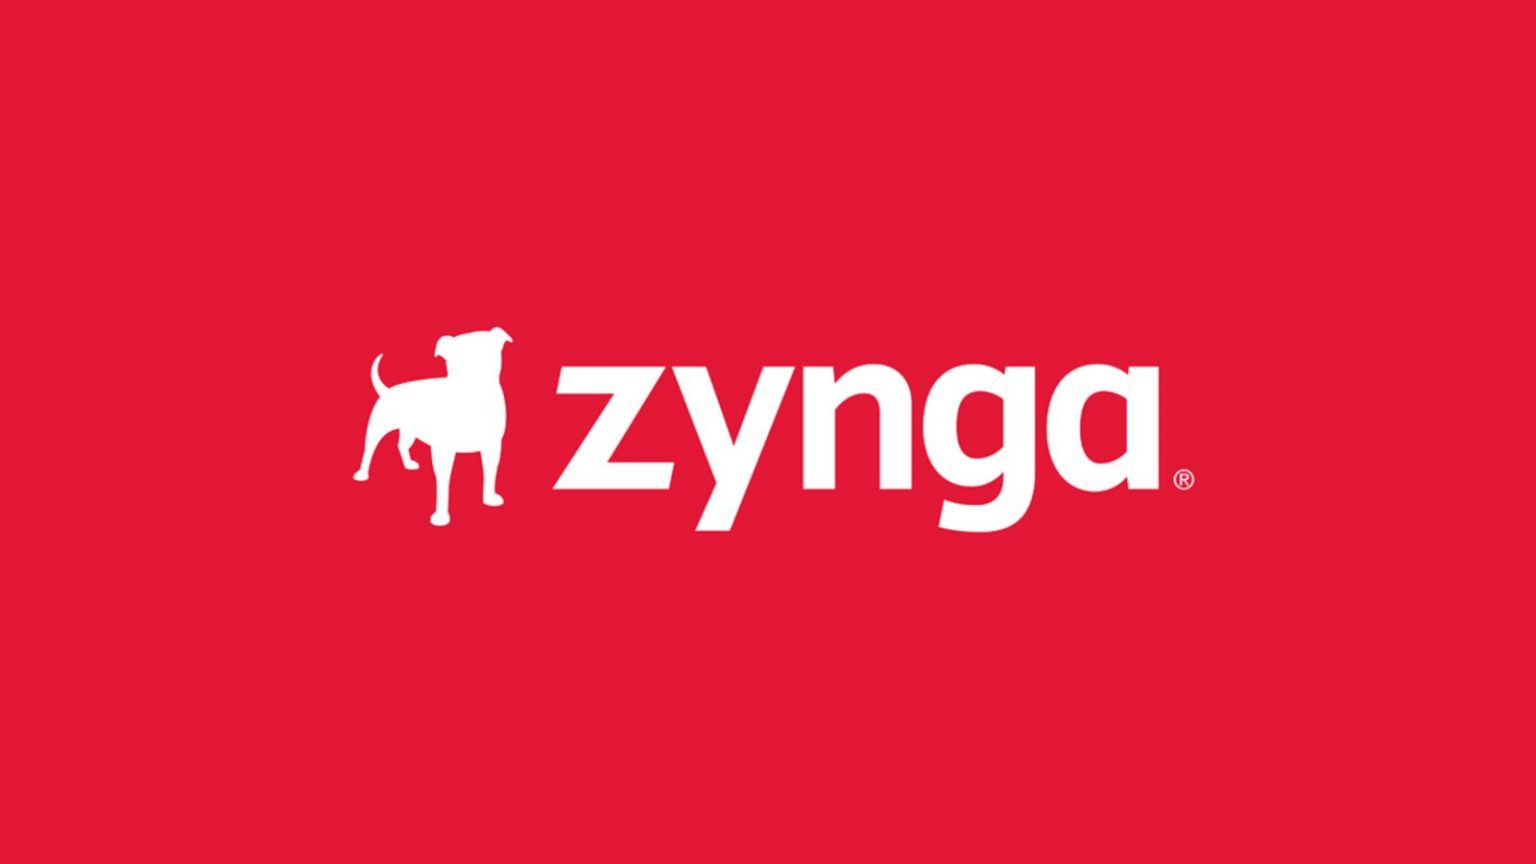 Zynga reports Q3 revenue of $705M, up 40% YoY, bookings of $668M, up 6% YoY, says it hired a former Coca-Cola game executive as new head of blockchain gaming (Dean Takahashi/VentureBeat)